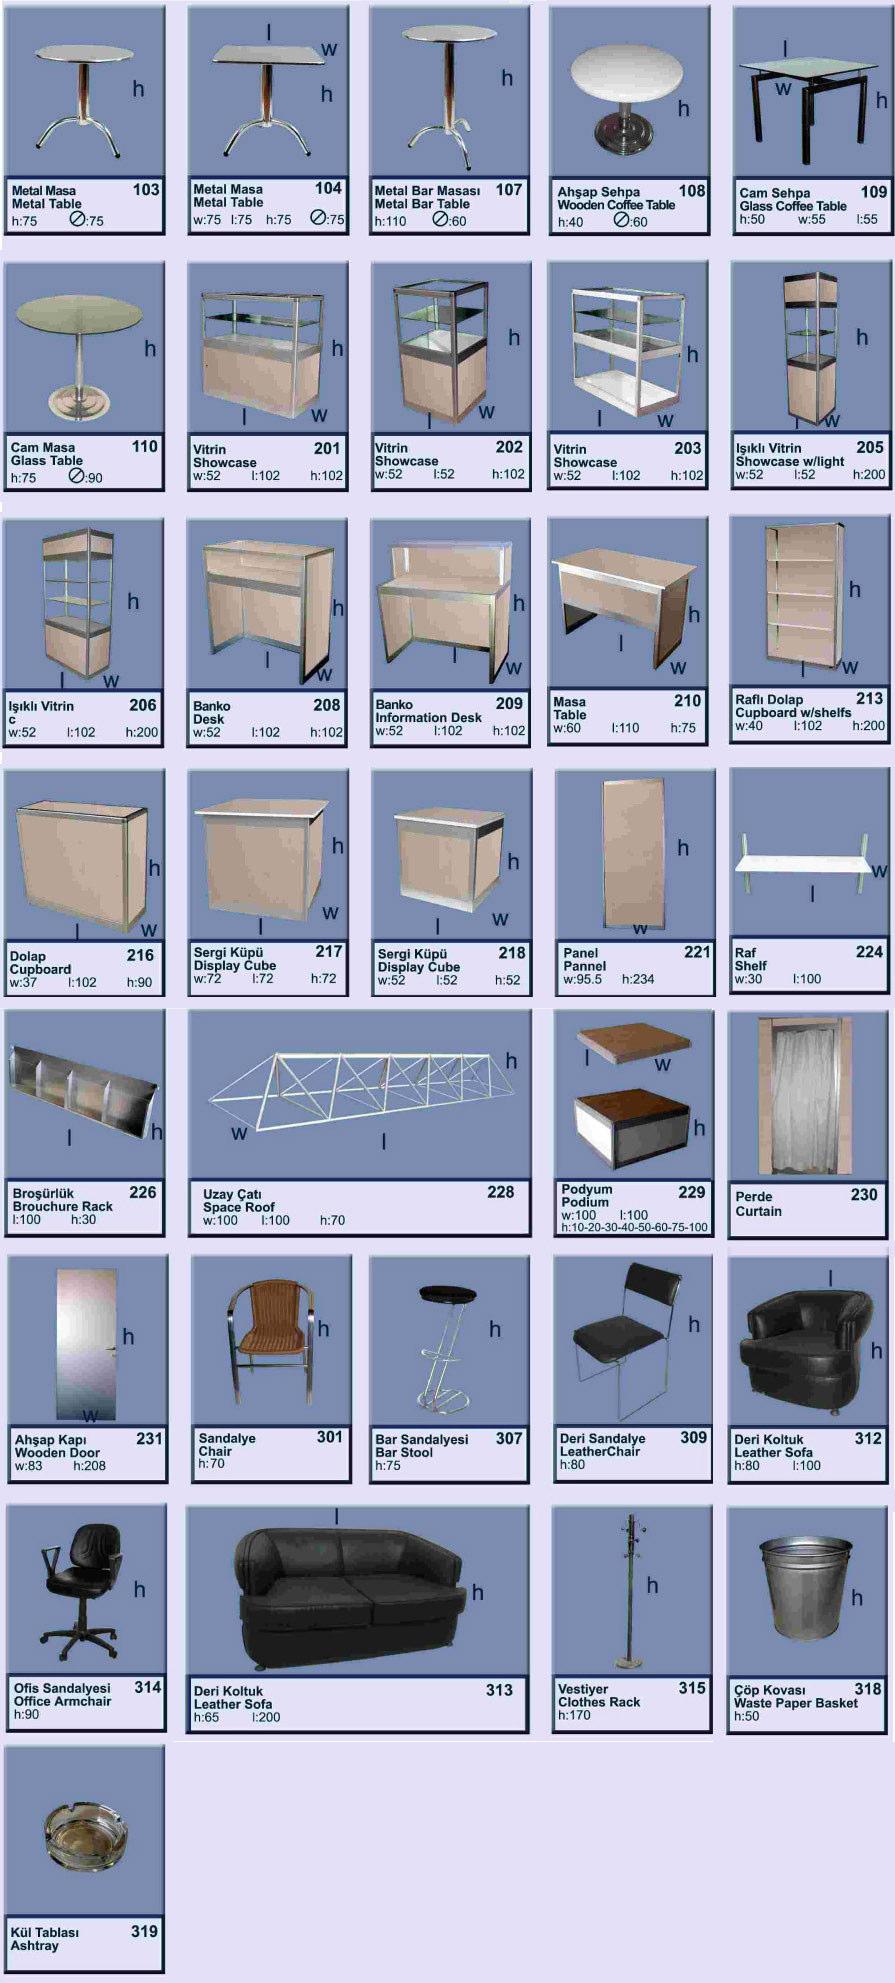 List of Stand Furniture and